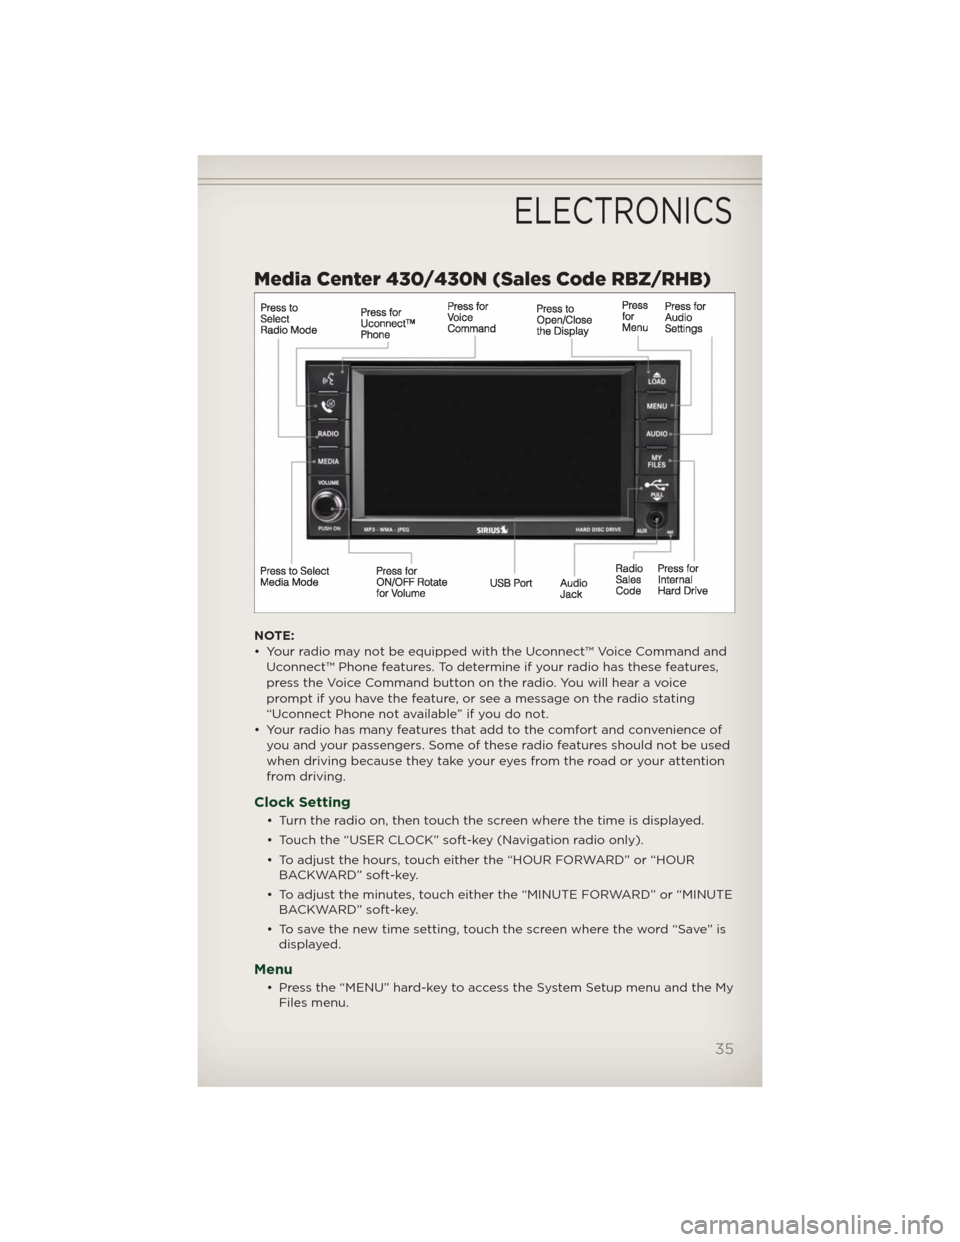 JEEP PATRIOT 2012 1.G User Guide Media Center 430/430N (Sales Code RBZ/RHB)
NOTE:
• Your radio may not be equipped with the Uconnect™ Voice Command and
Uconnect™ Phone features. To determine if your radio has these features,
pr